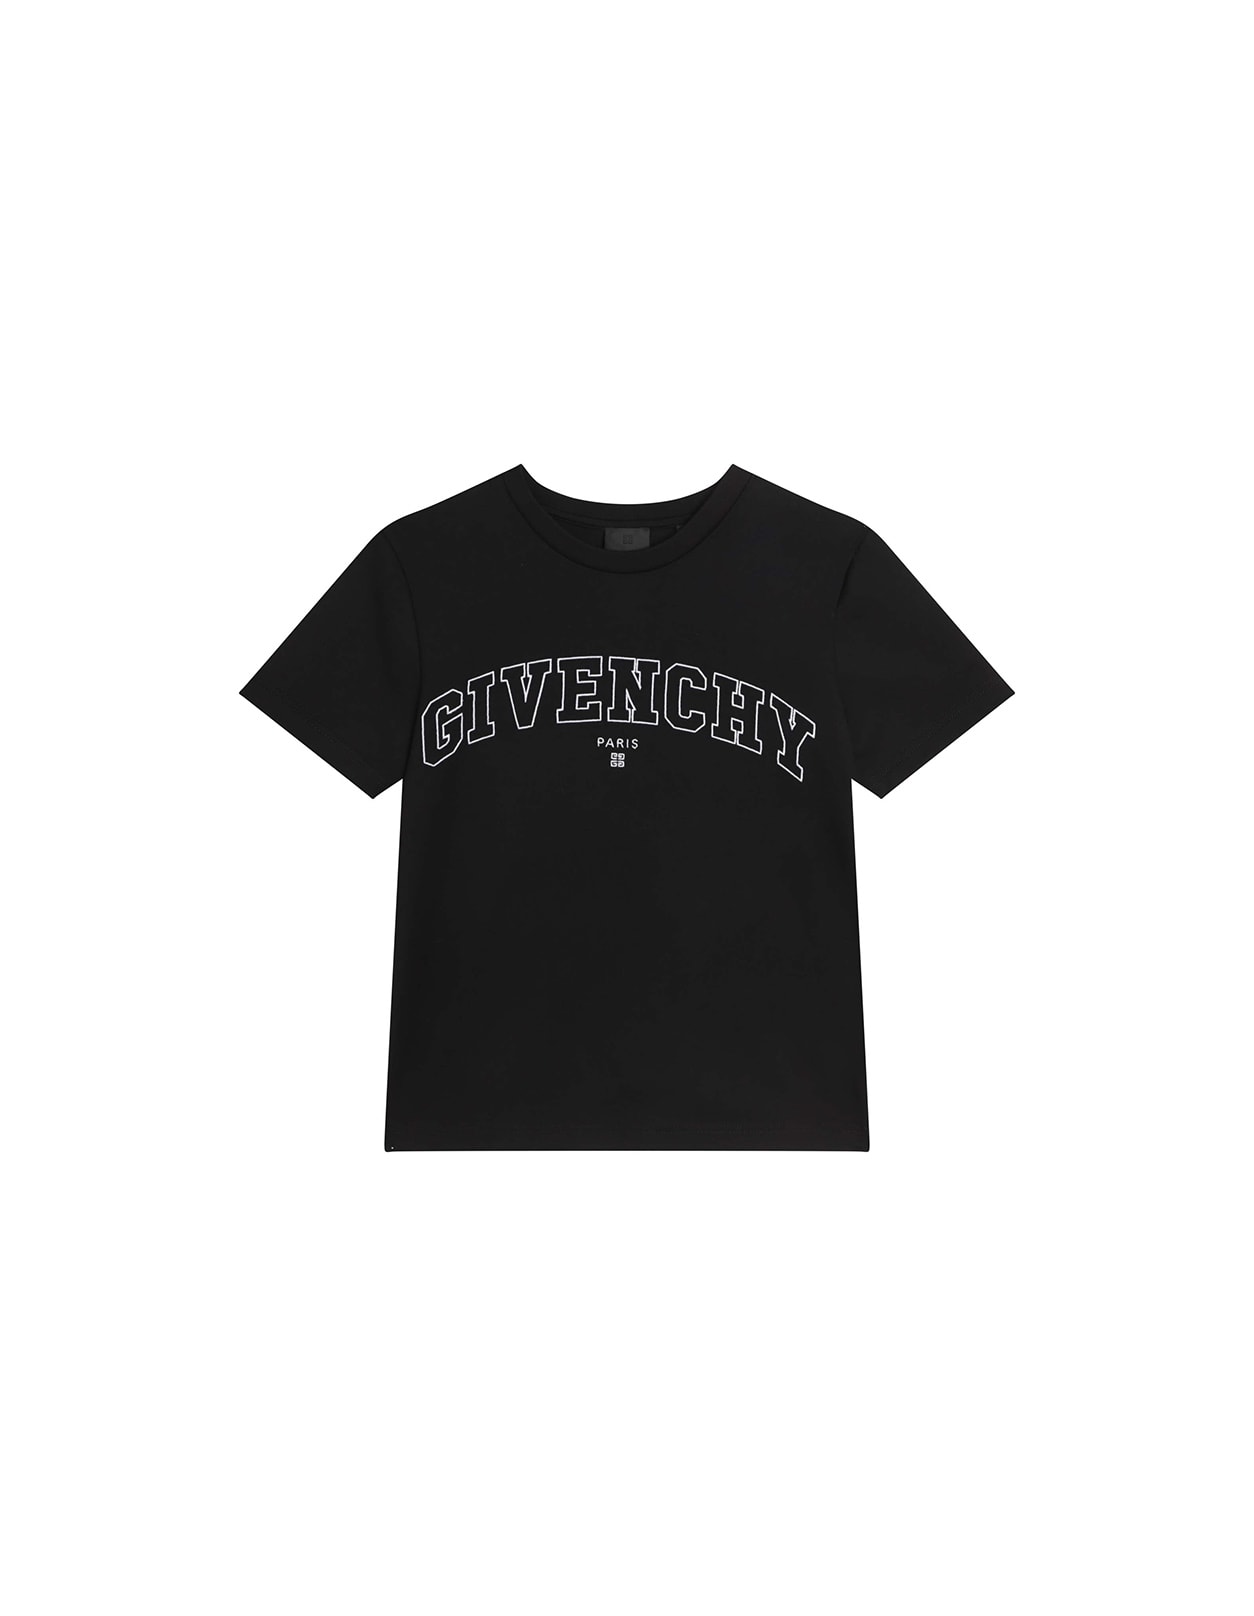 GIVENCHY BLACK T-SHIRT WITH OLD SCHOOL LOGO